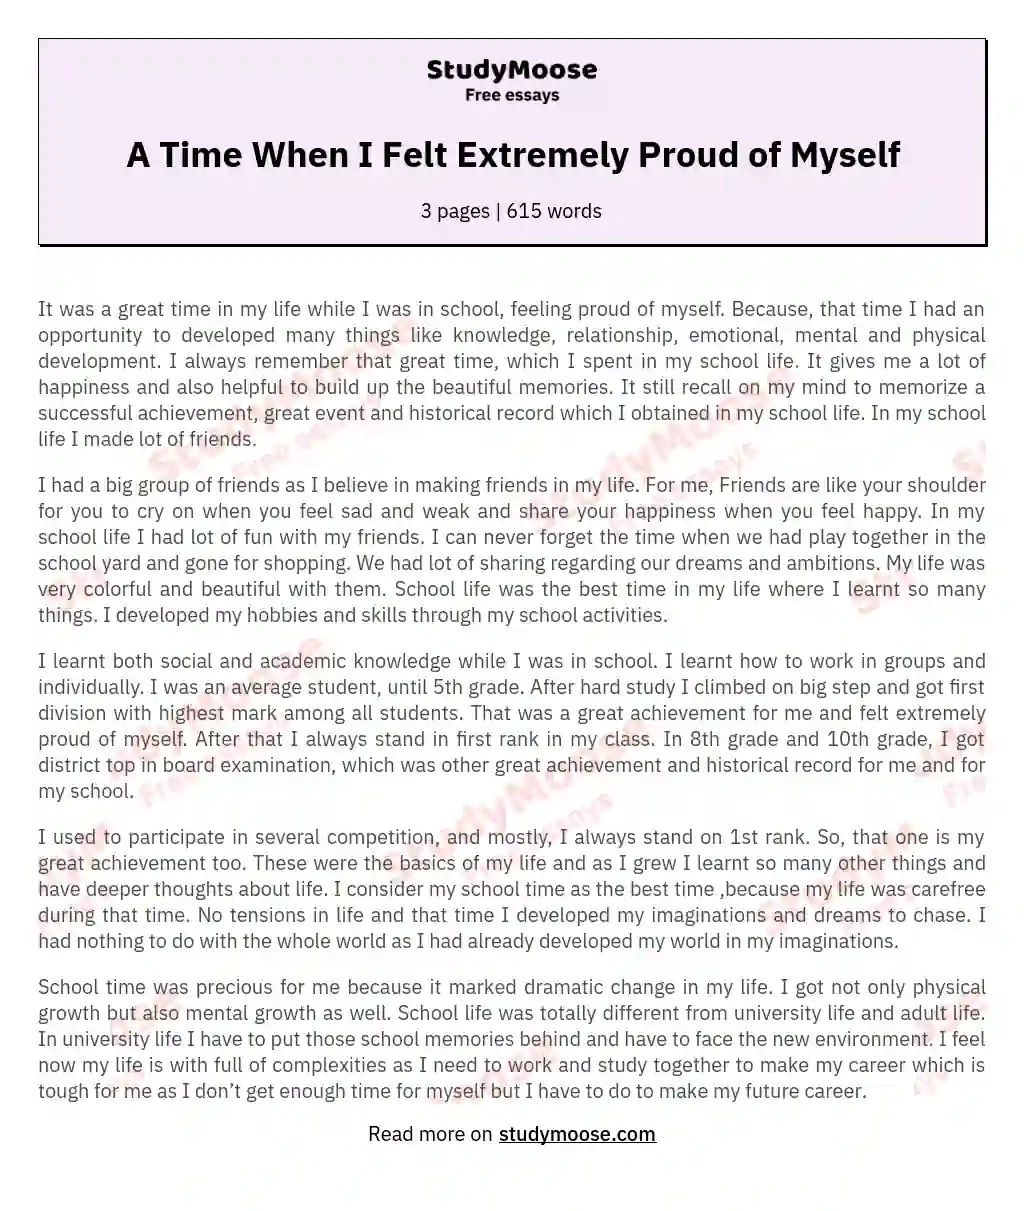 A Time When I Felt Extremely Proud of Myself essay